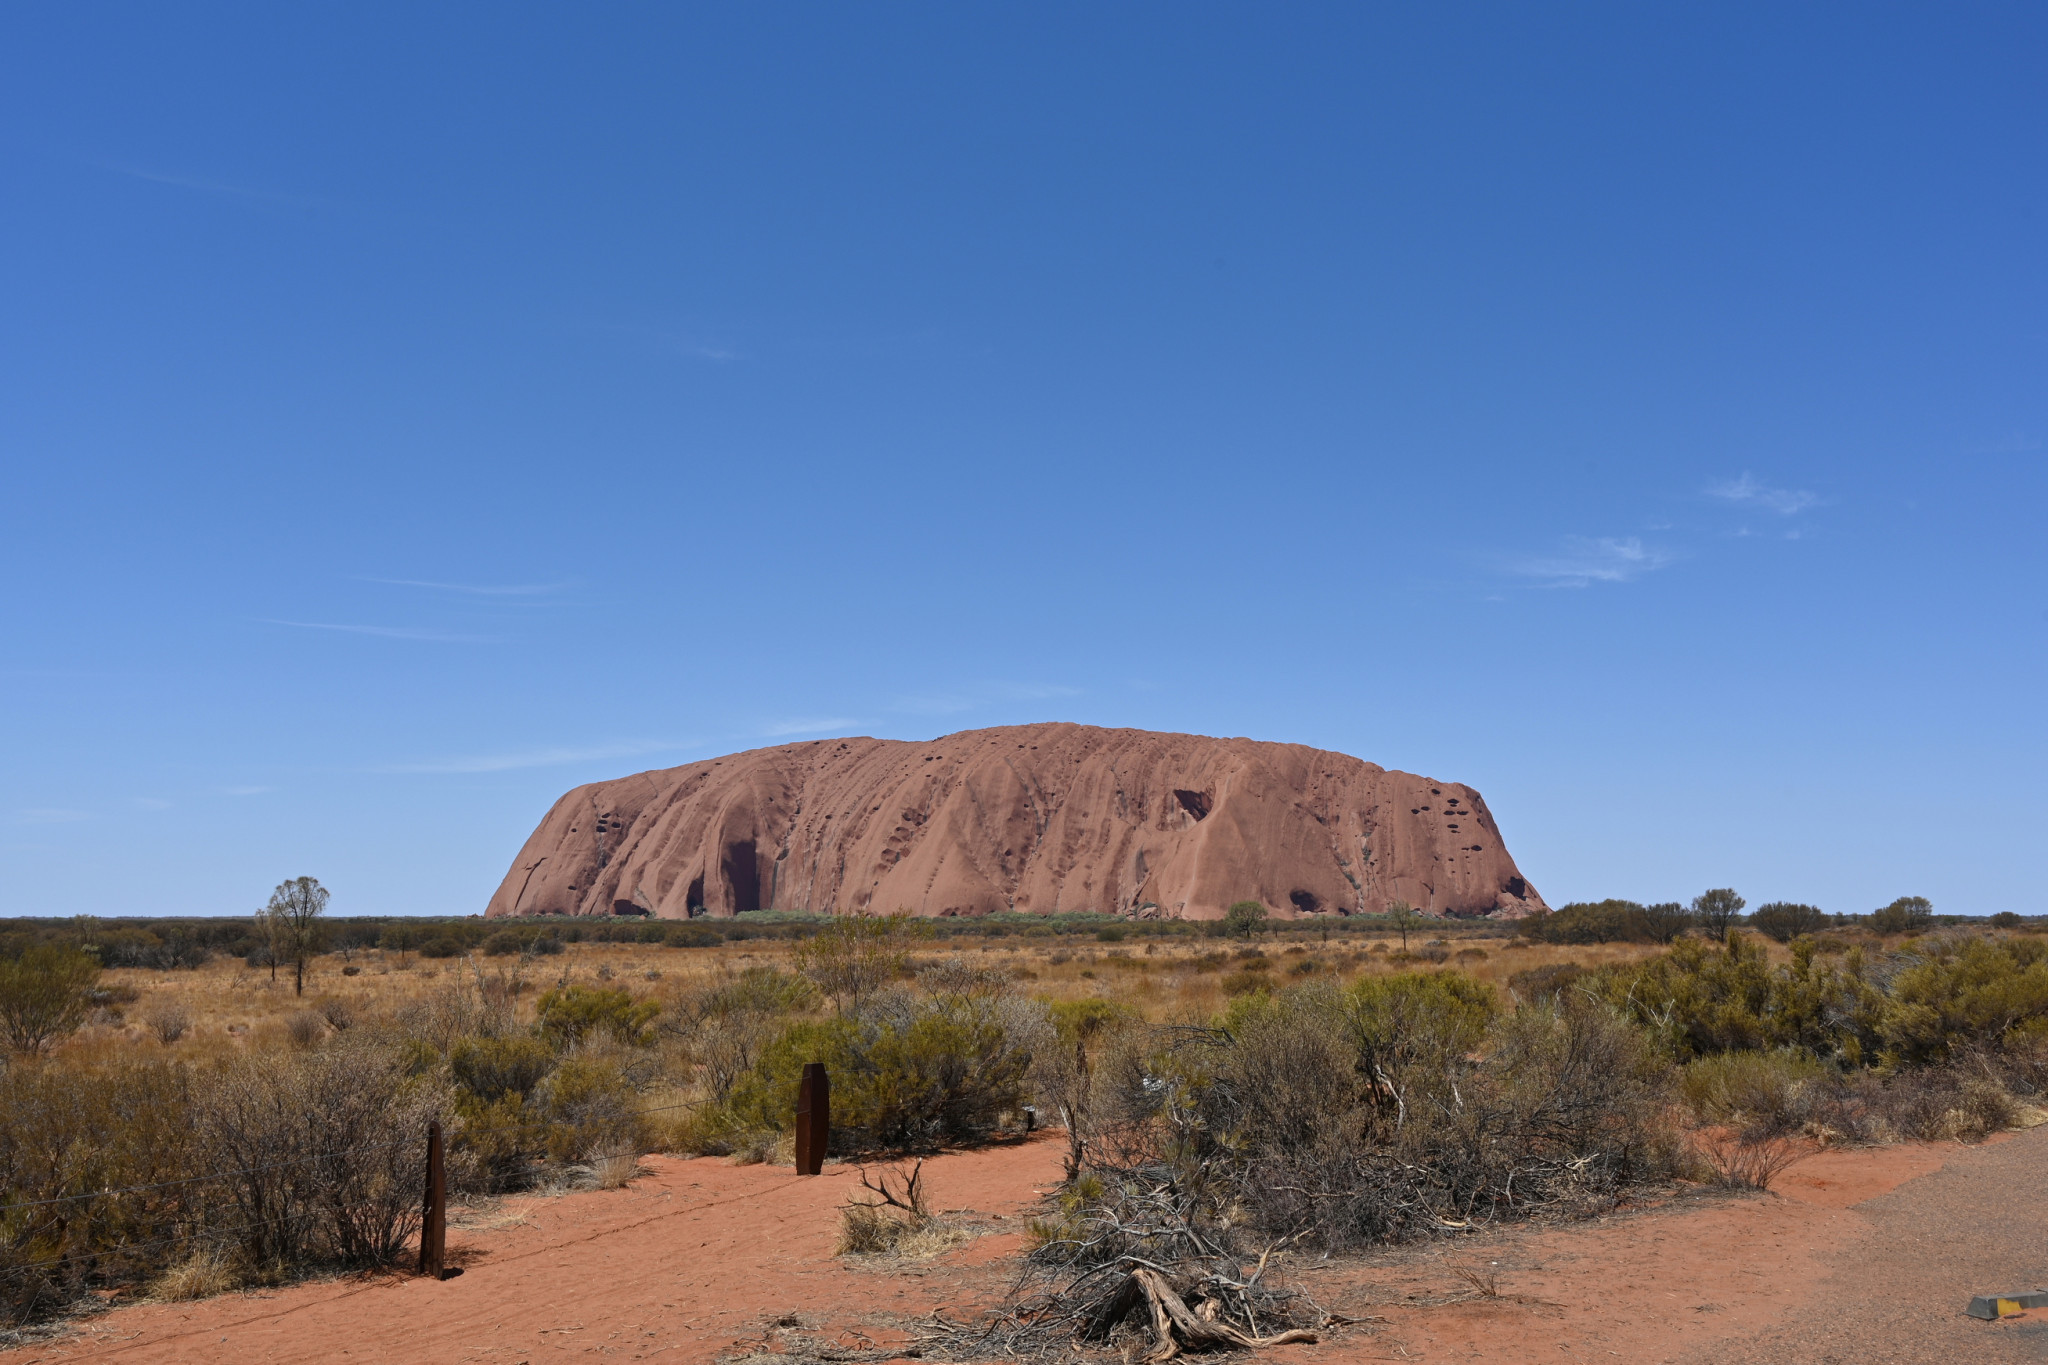 Uluru suggested as location for Baseball5 National Championship in Australia